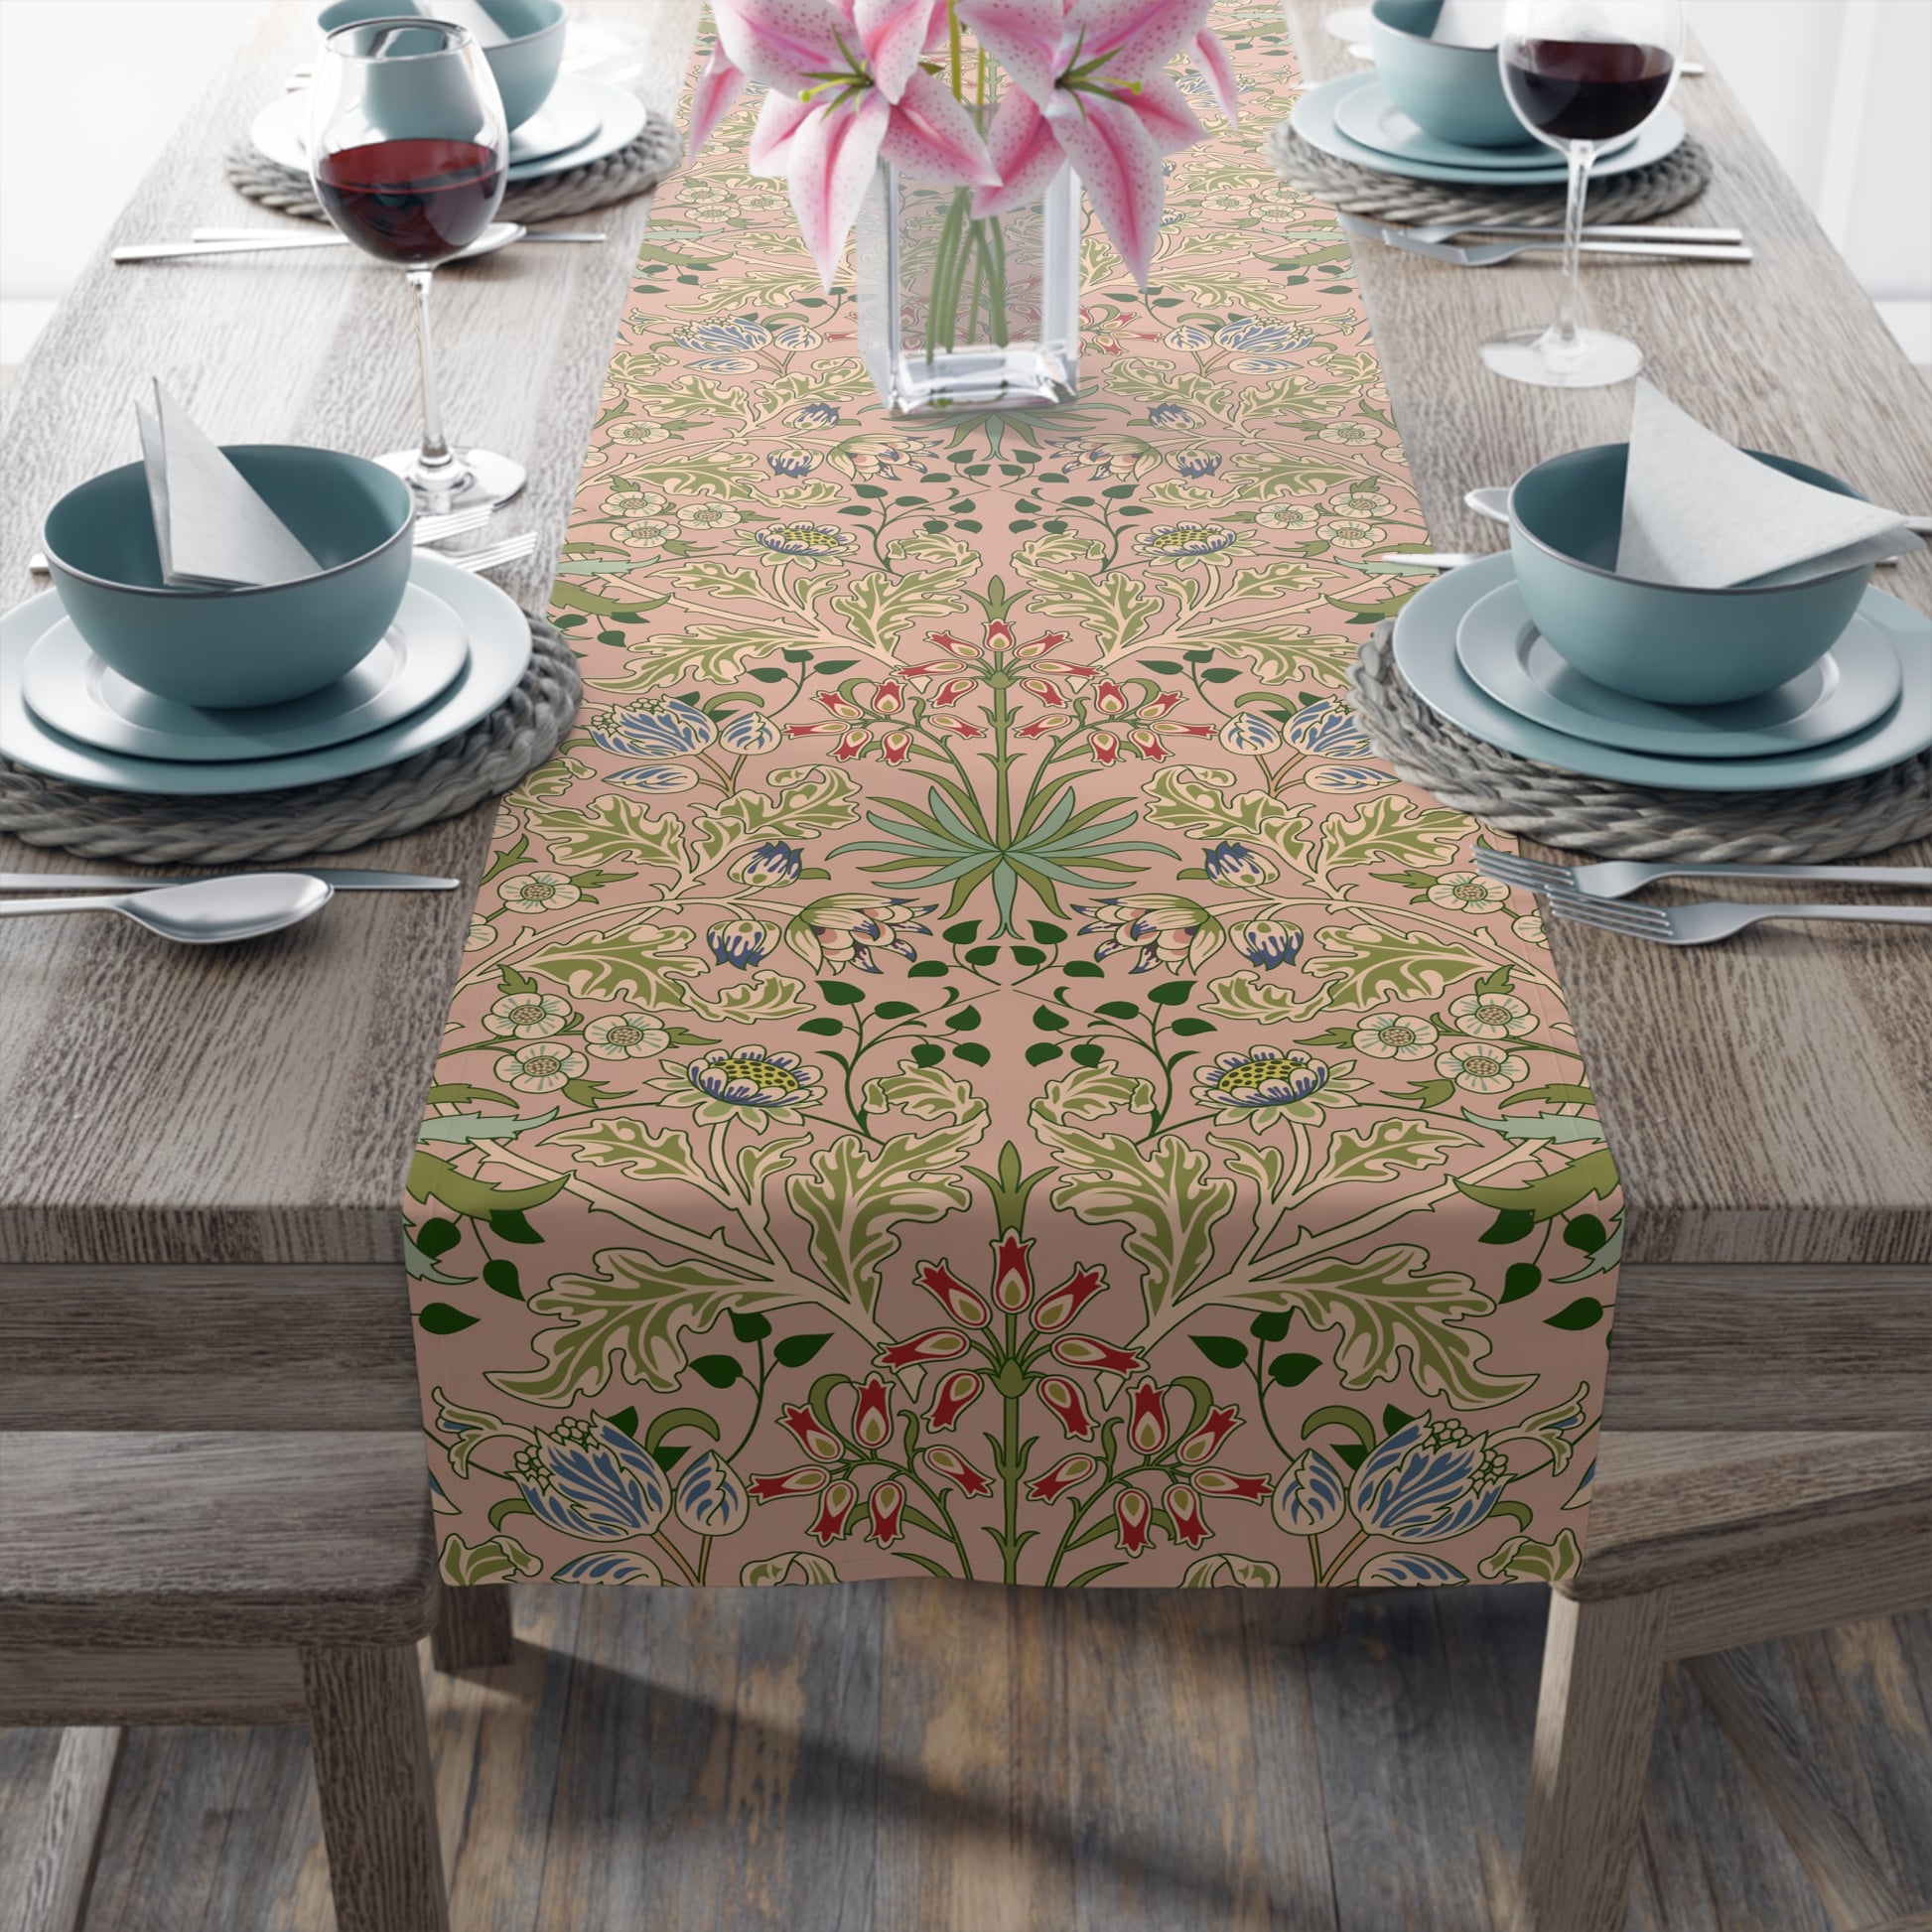 william-morris-co-table-runner-hyacinth-collection-blossom-4